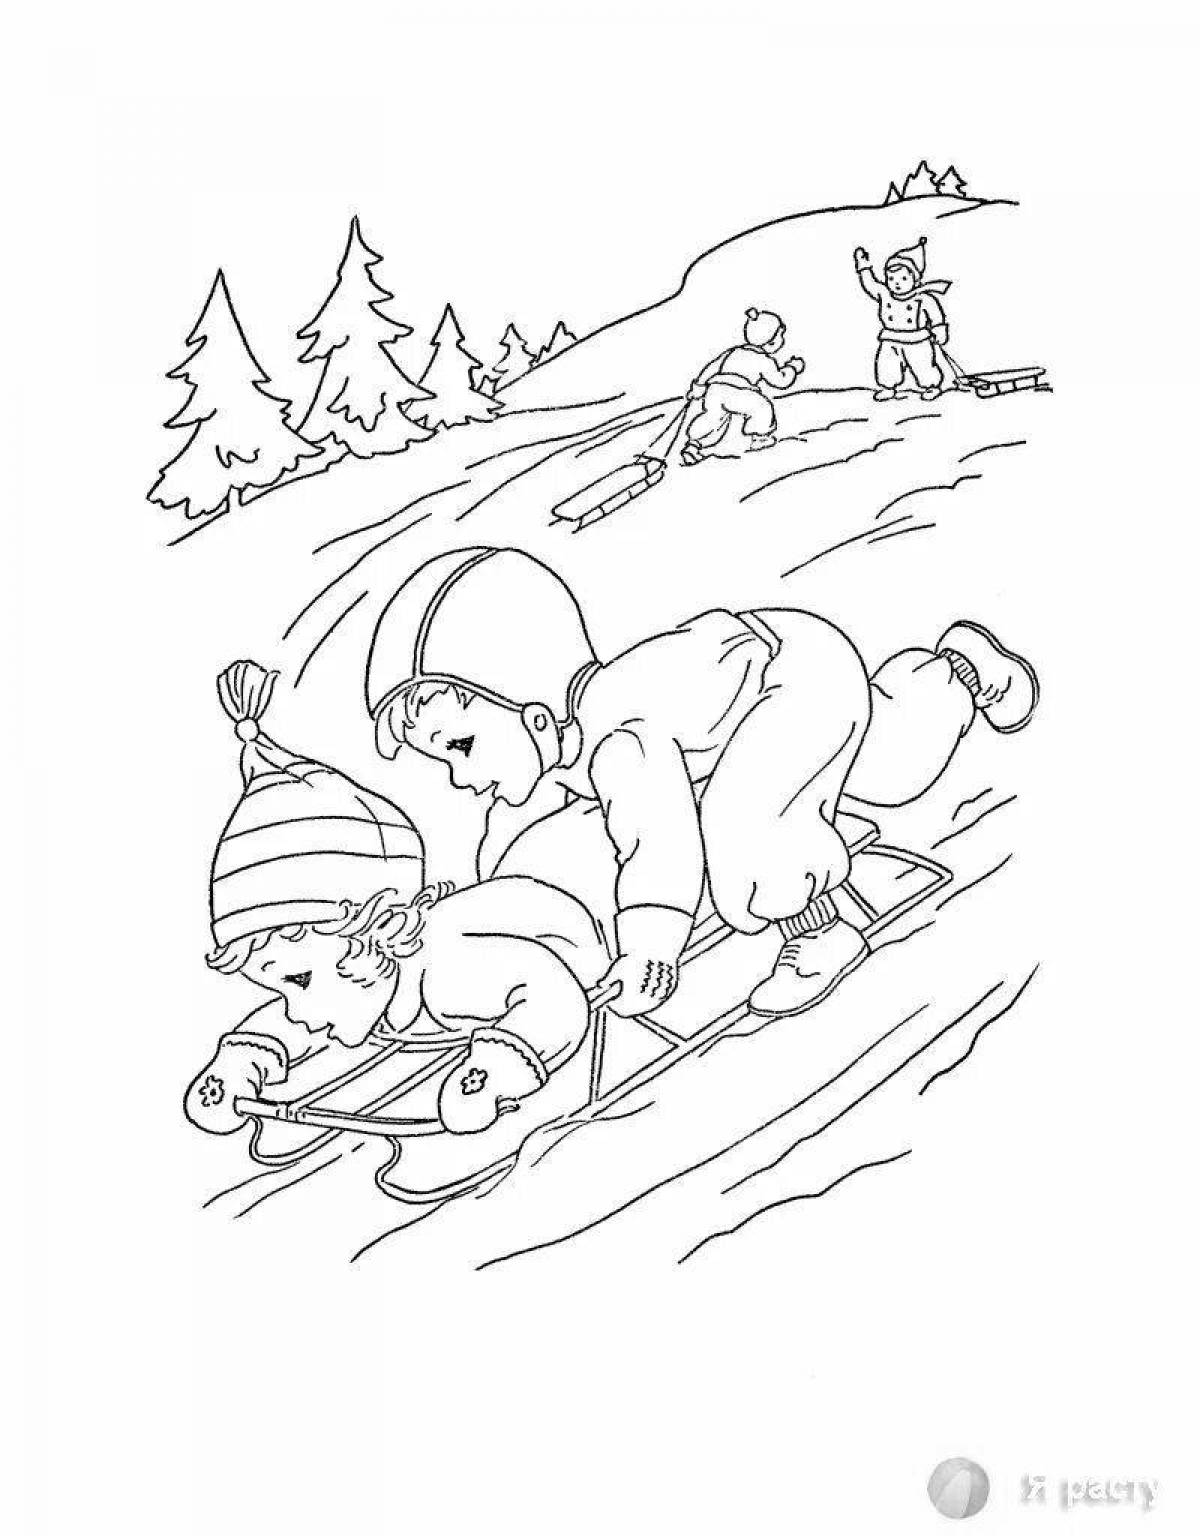 Children's winter holiday glamor coloring book